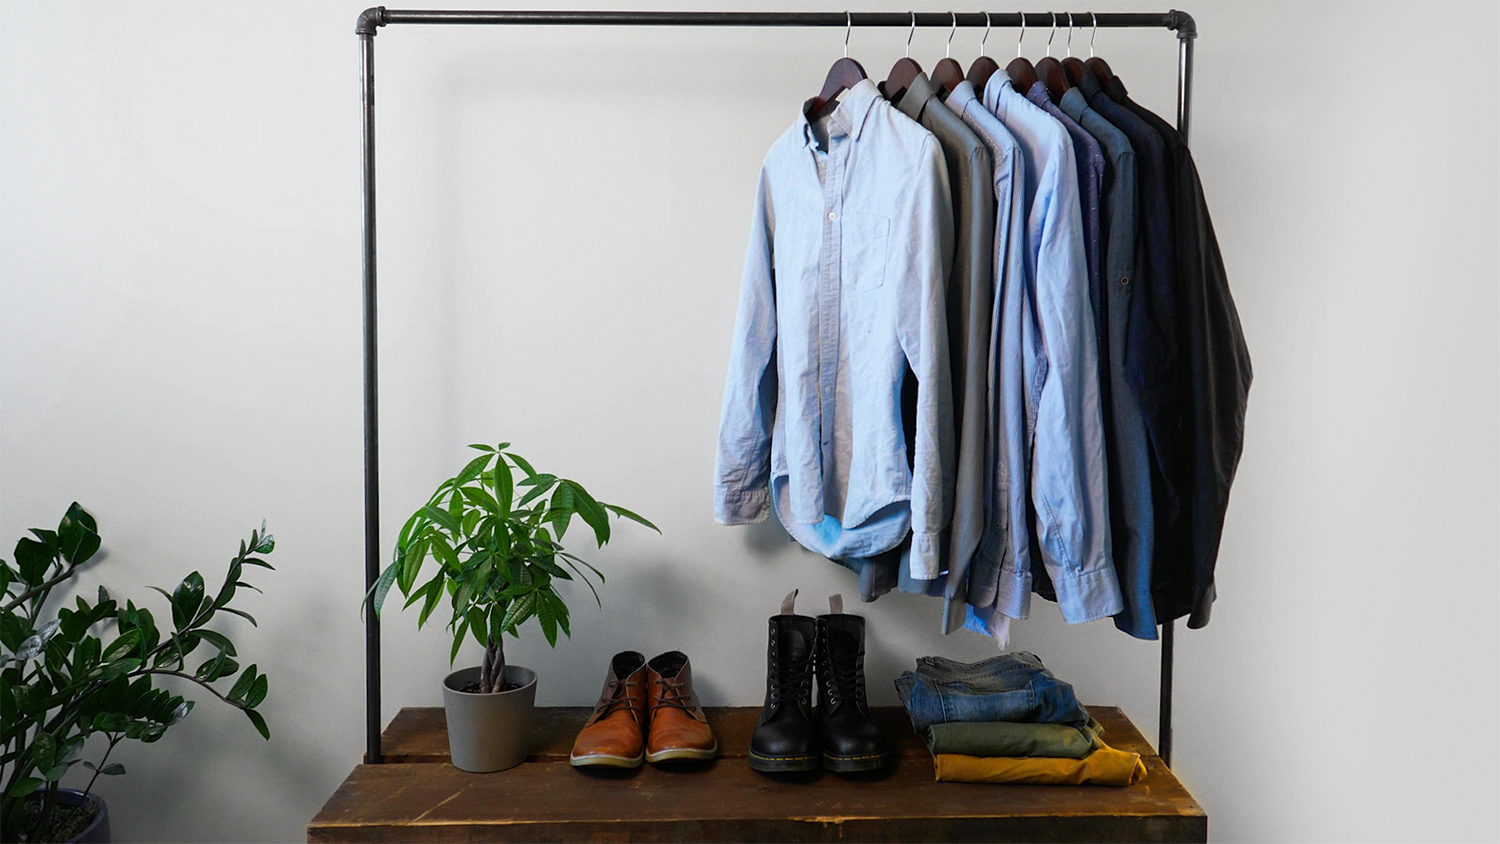 How To Make Pipe Clothing Rack How to Easily Make a DIY Industrial-Style Clothing Rack | Digital Trends